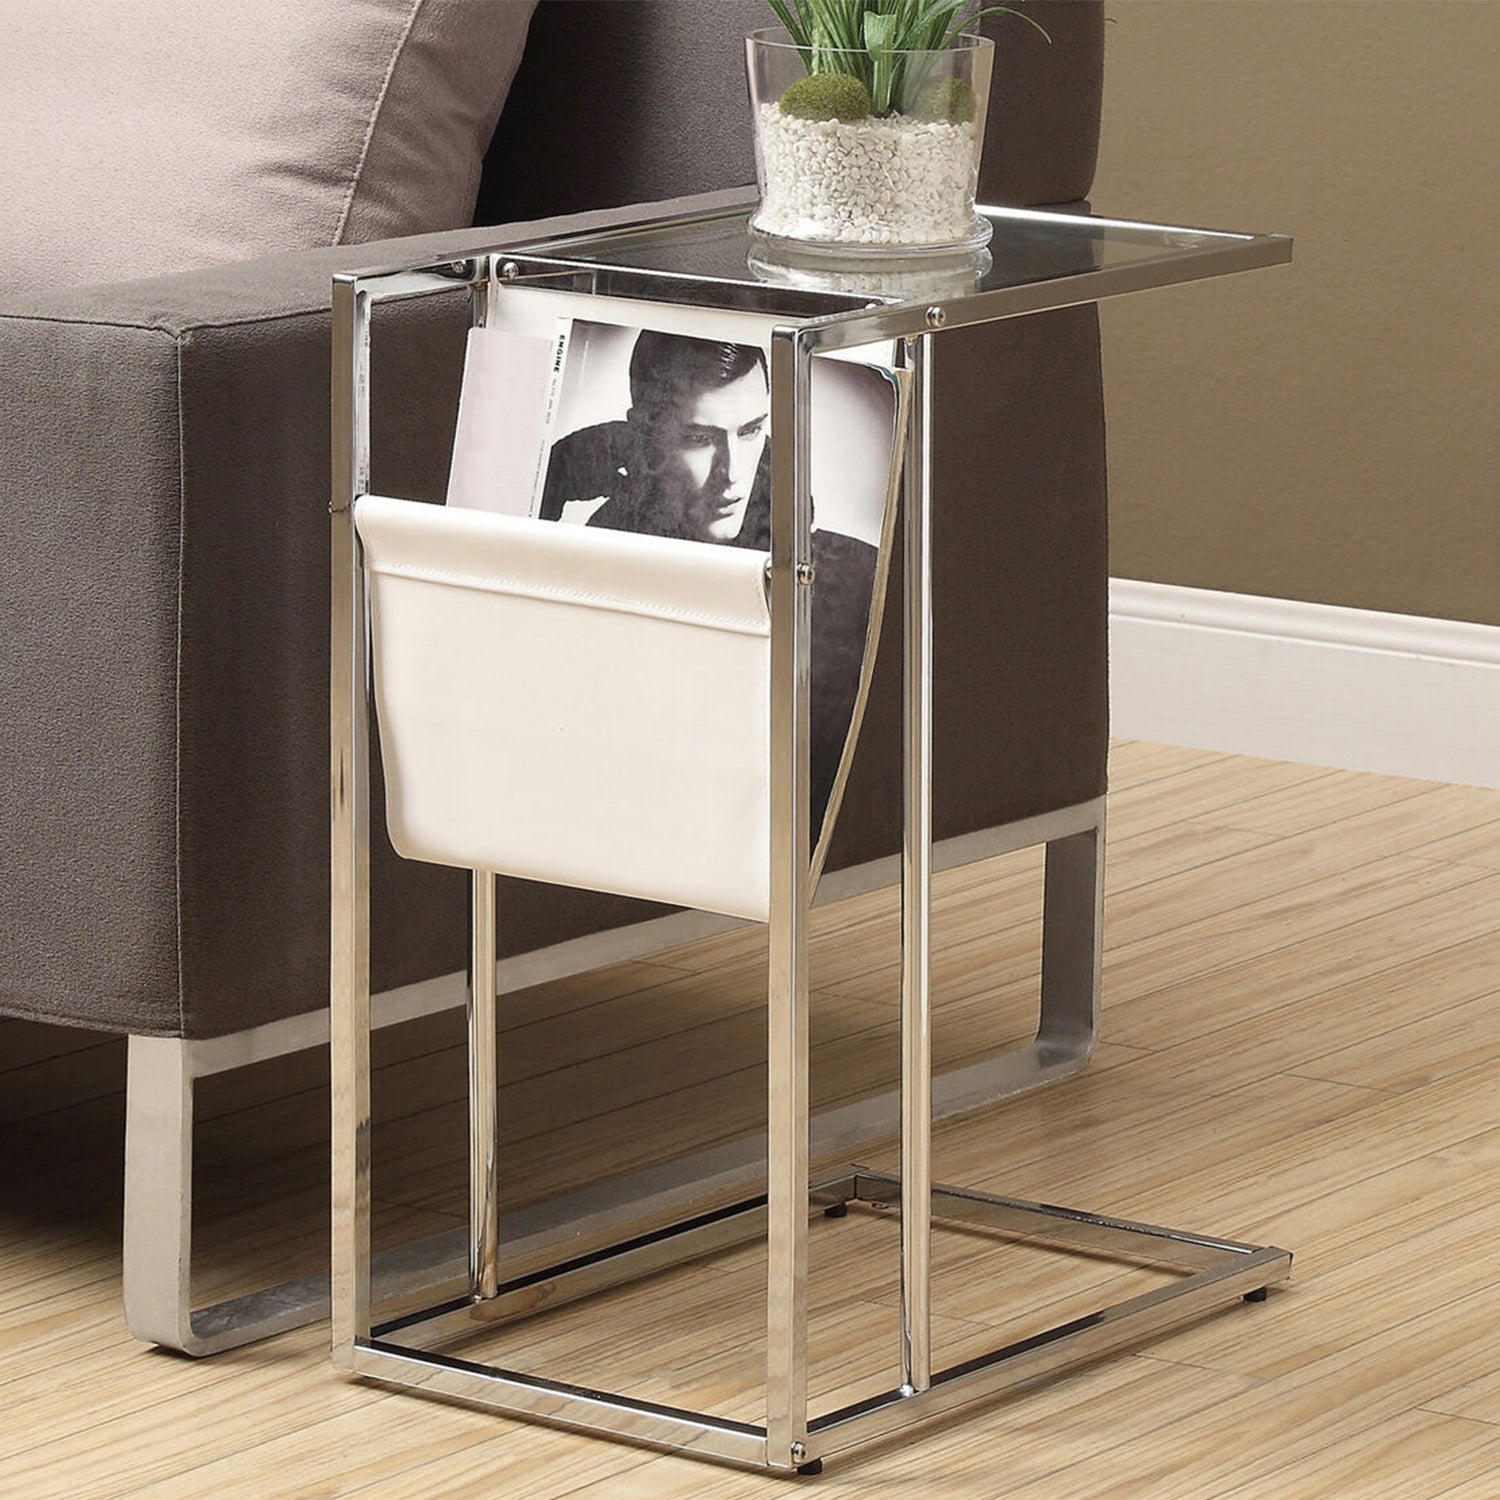 19.5" X 12" X 24" Chrome Tempered Glass Leather Look Accent Table